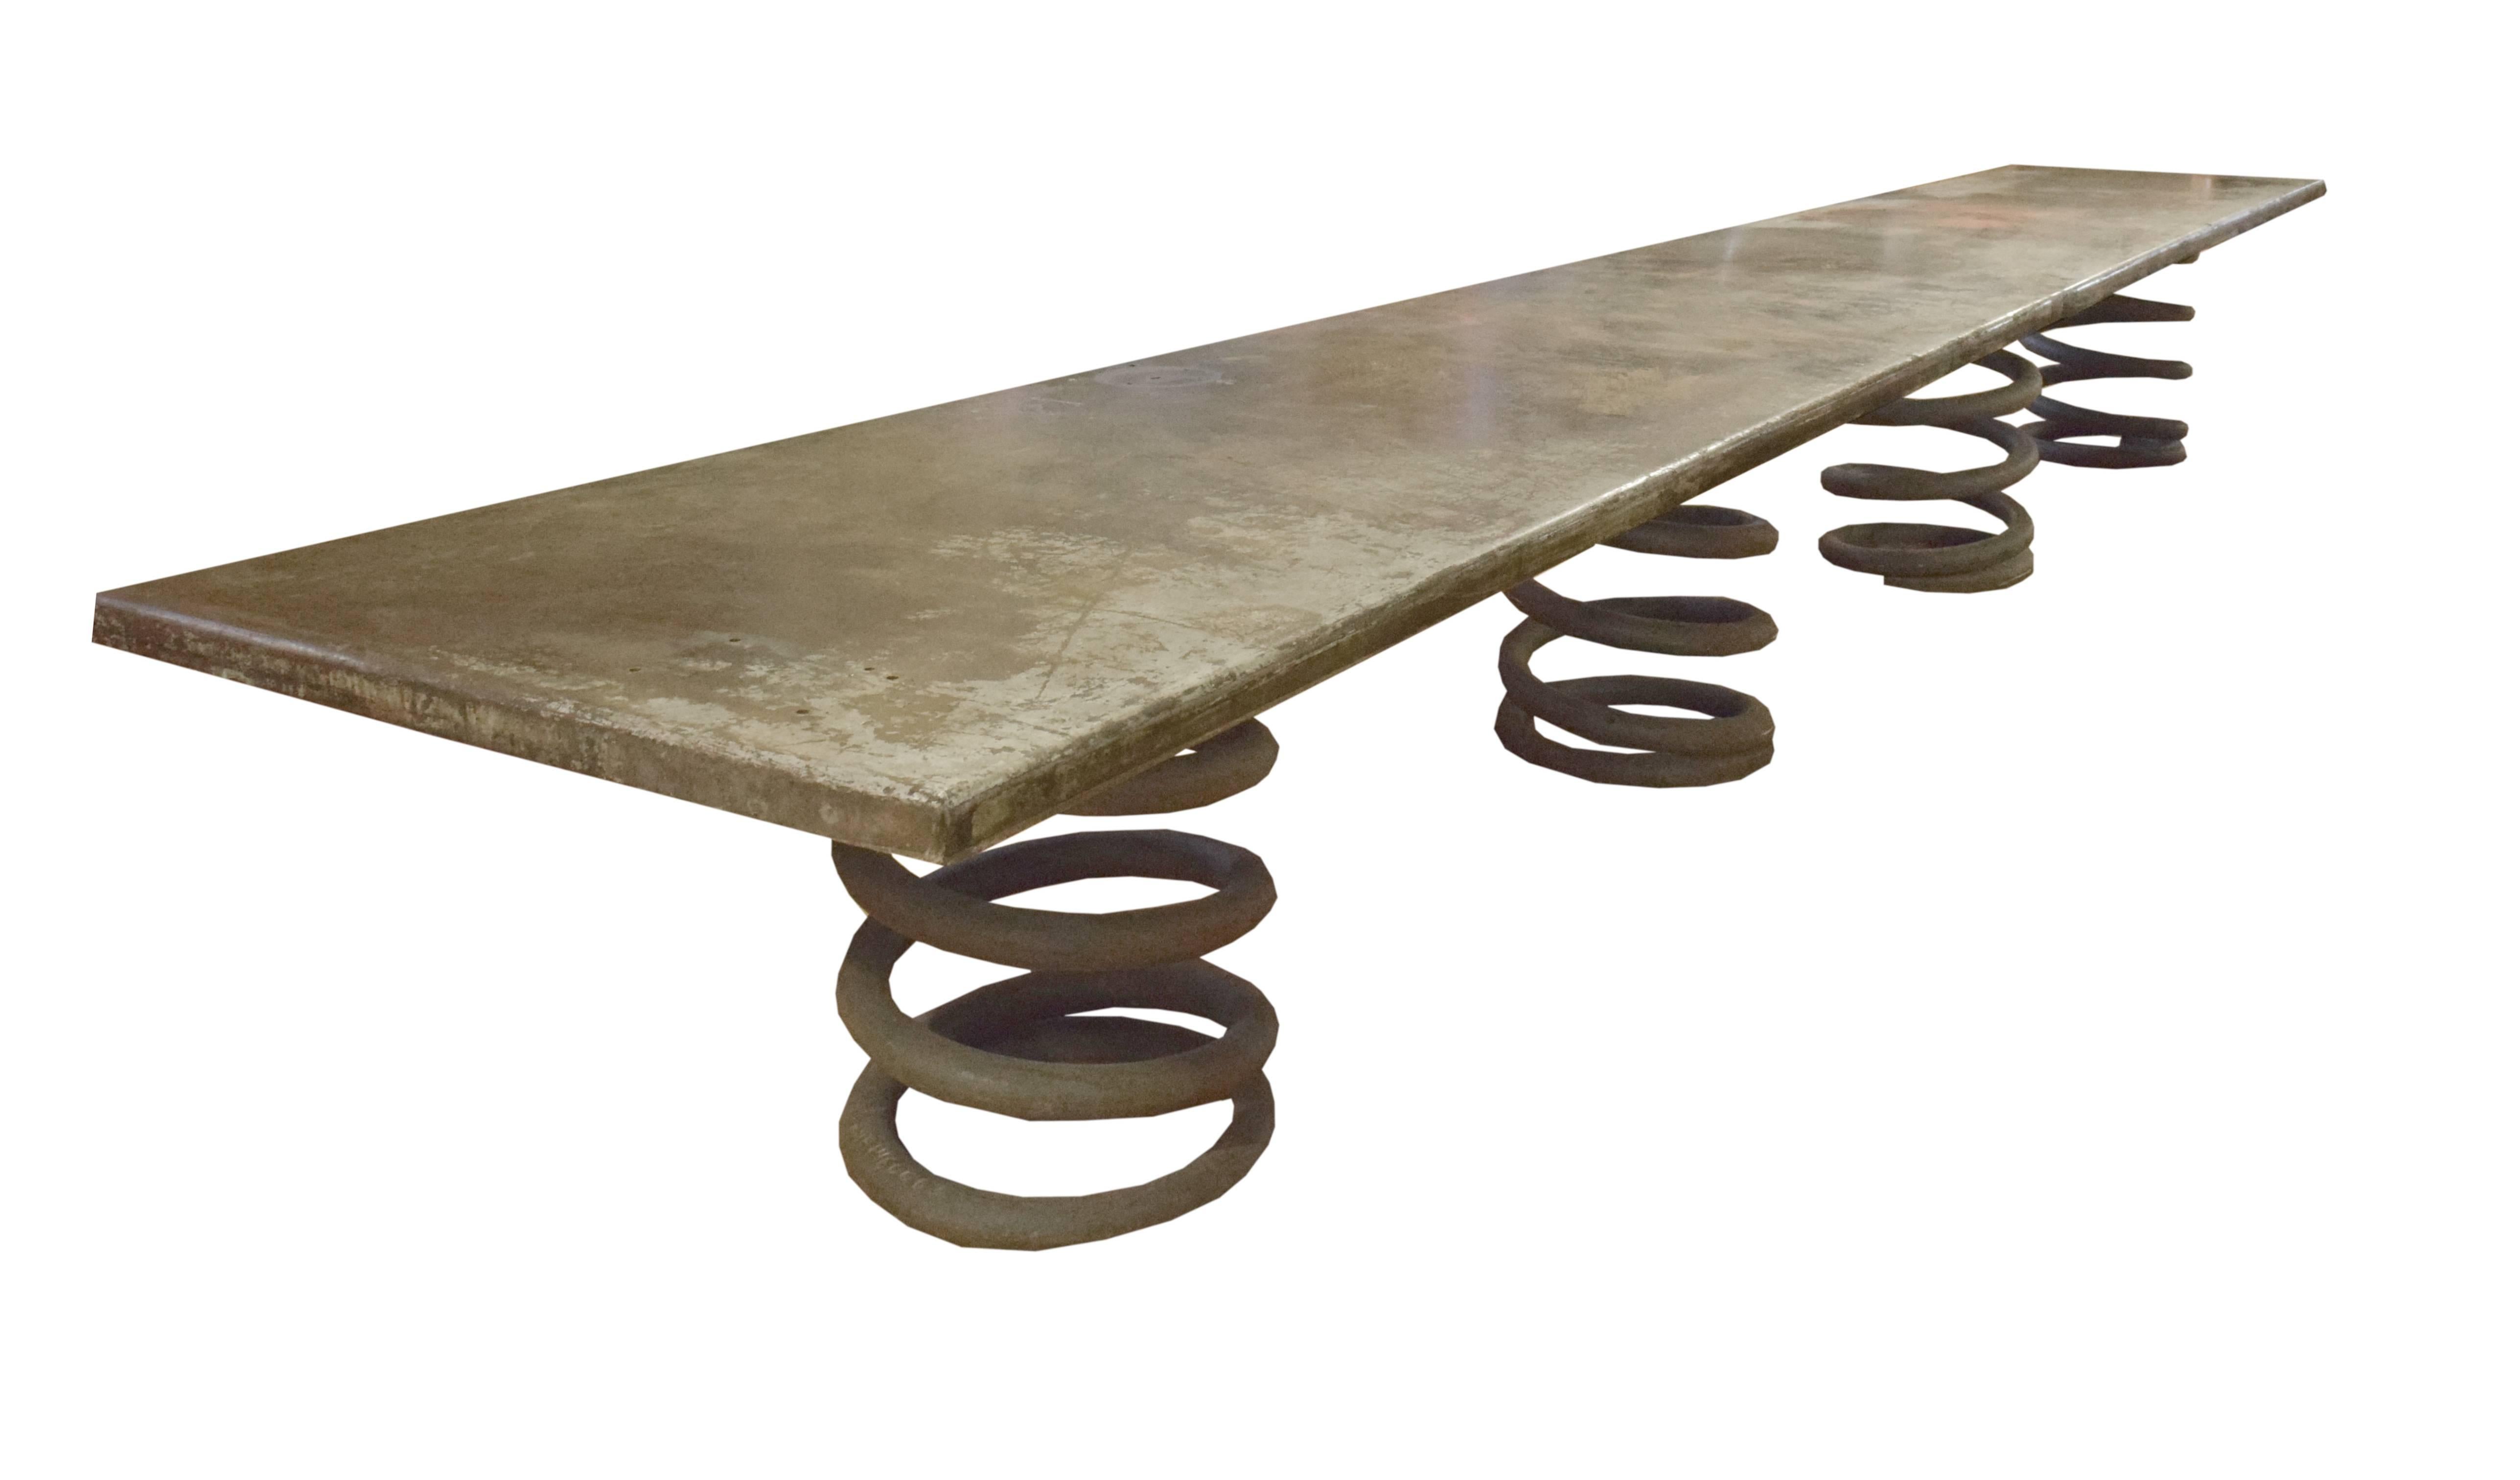 A massive 20-foot table constructed with a metal top with great patina from the auto shop at New Trier High School in Winnetka, Illinois, and four heavy-duty Industrial spring legs.